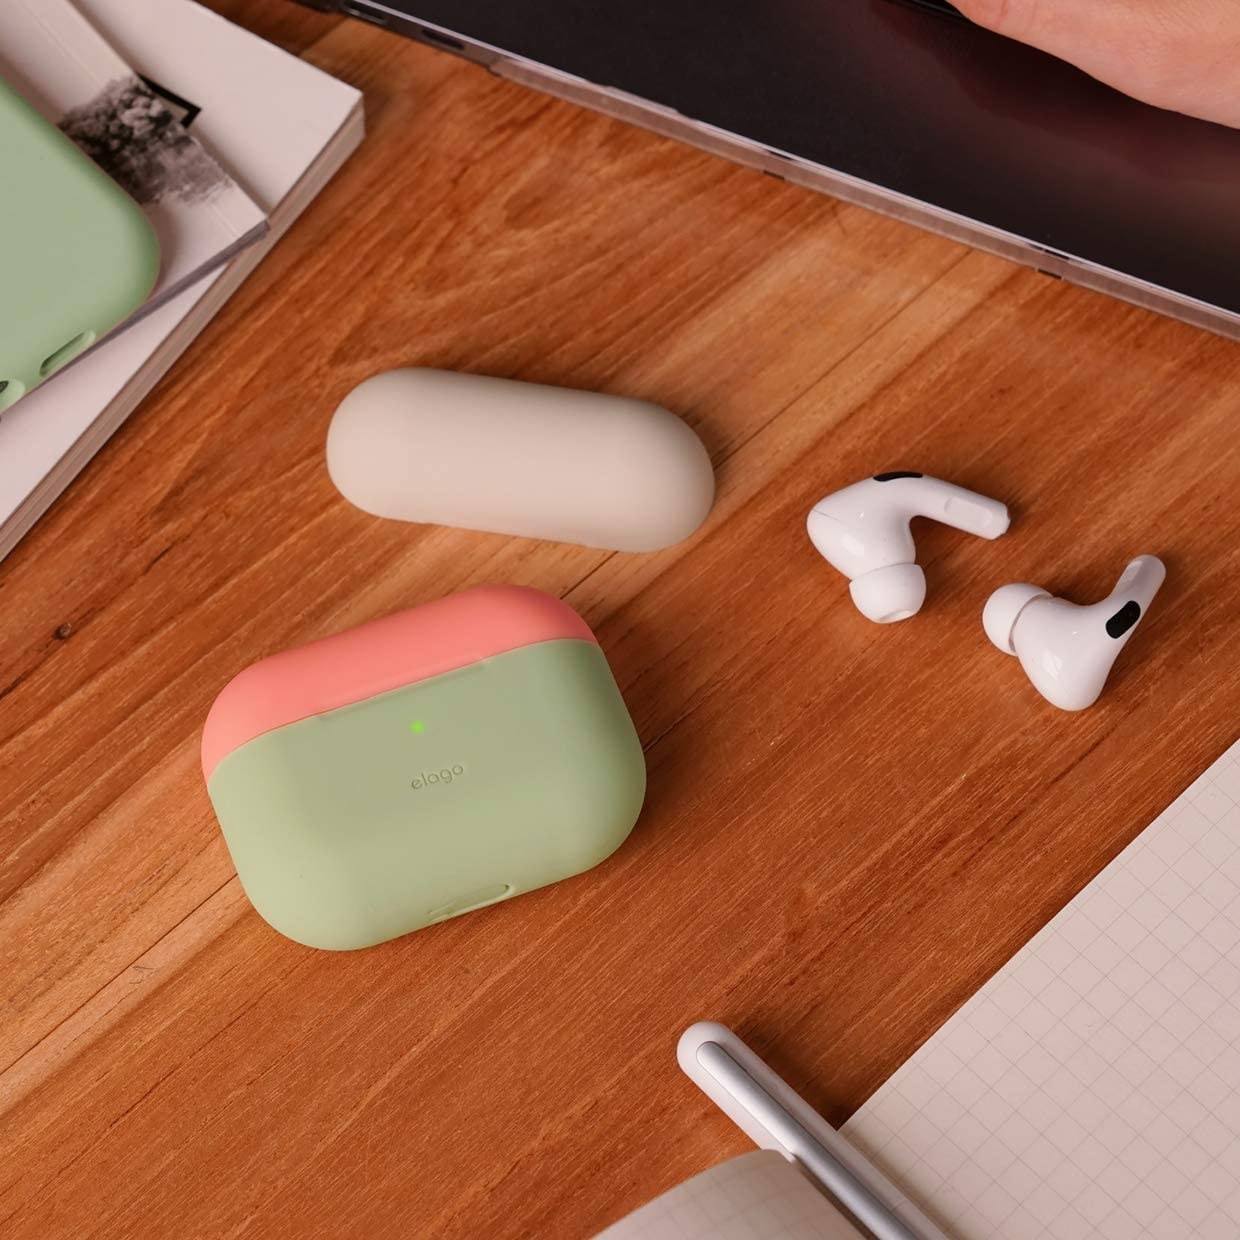 A pair of AirPods Pro beside the case on a wooden table